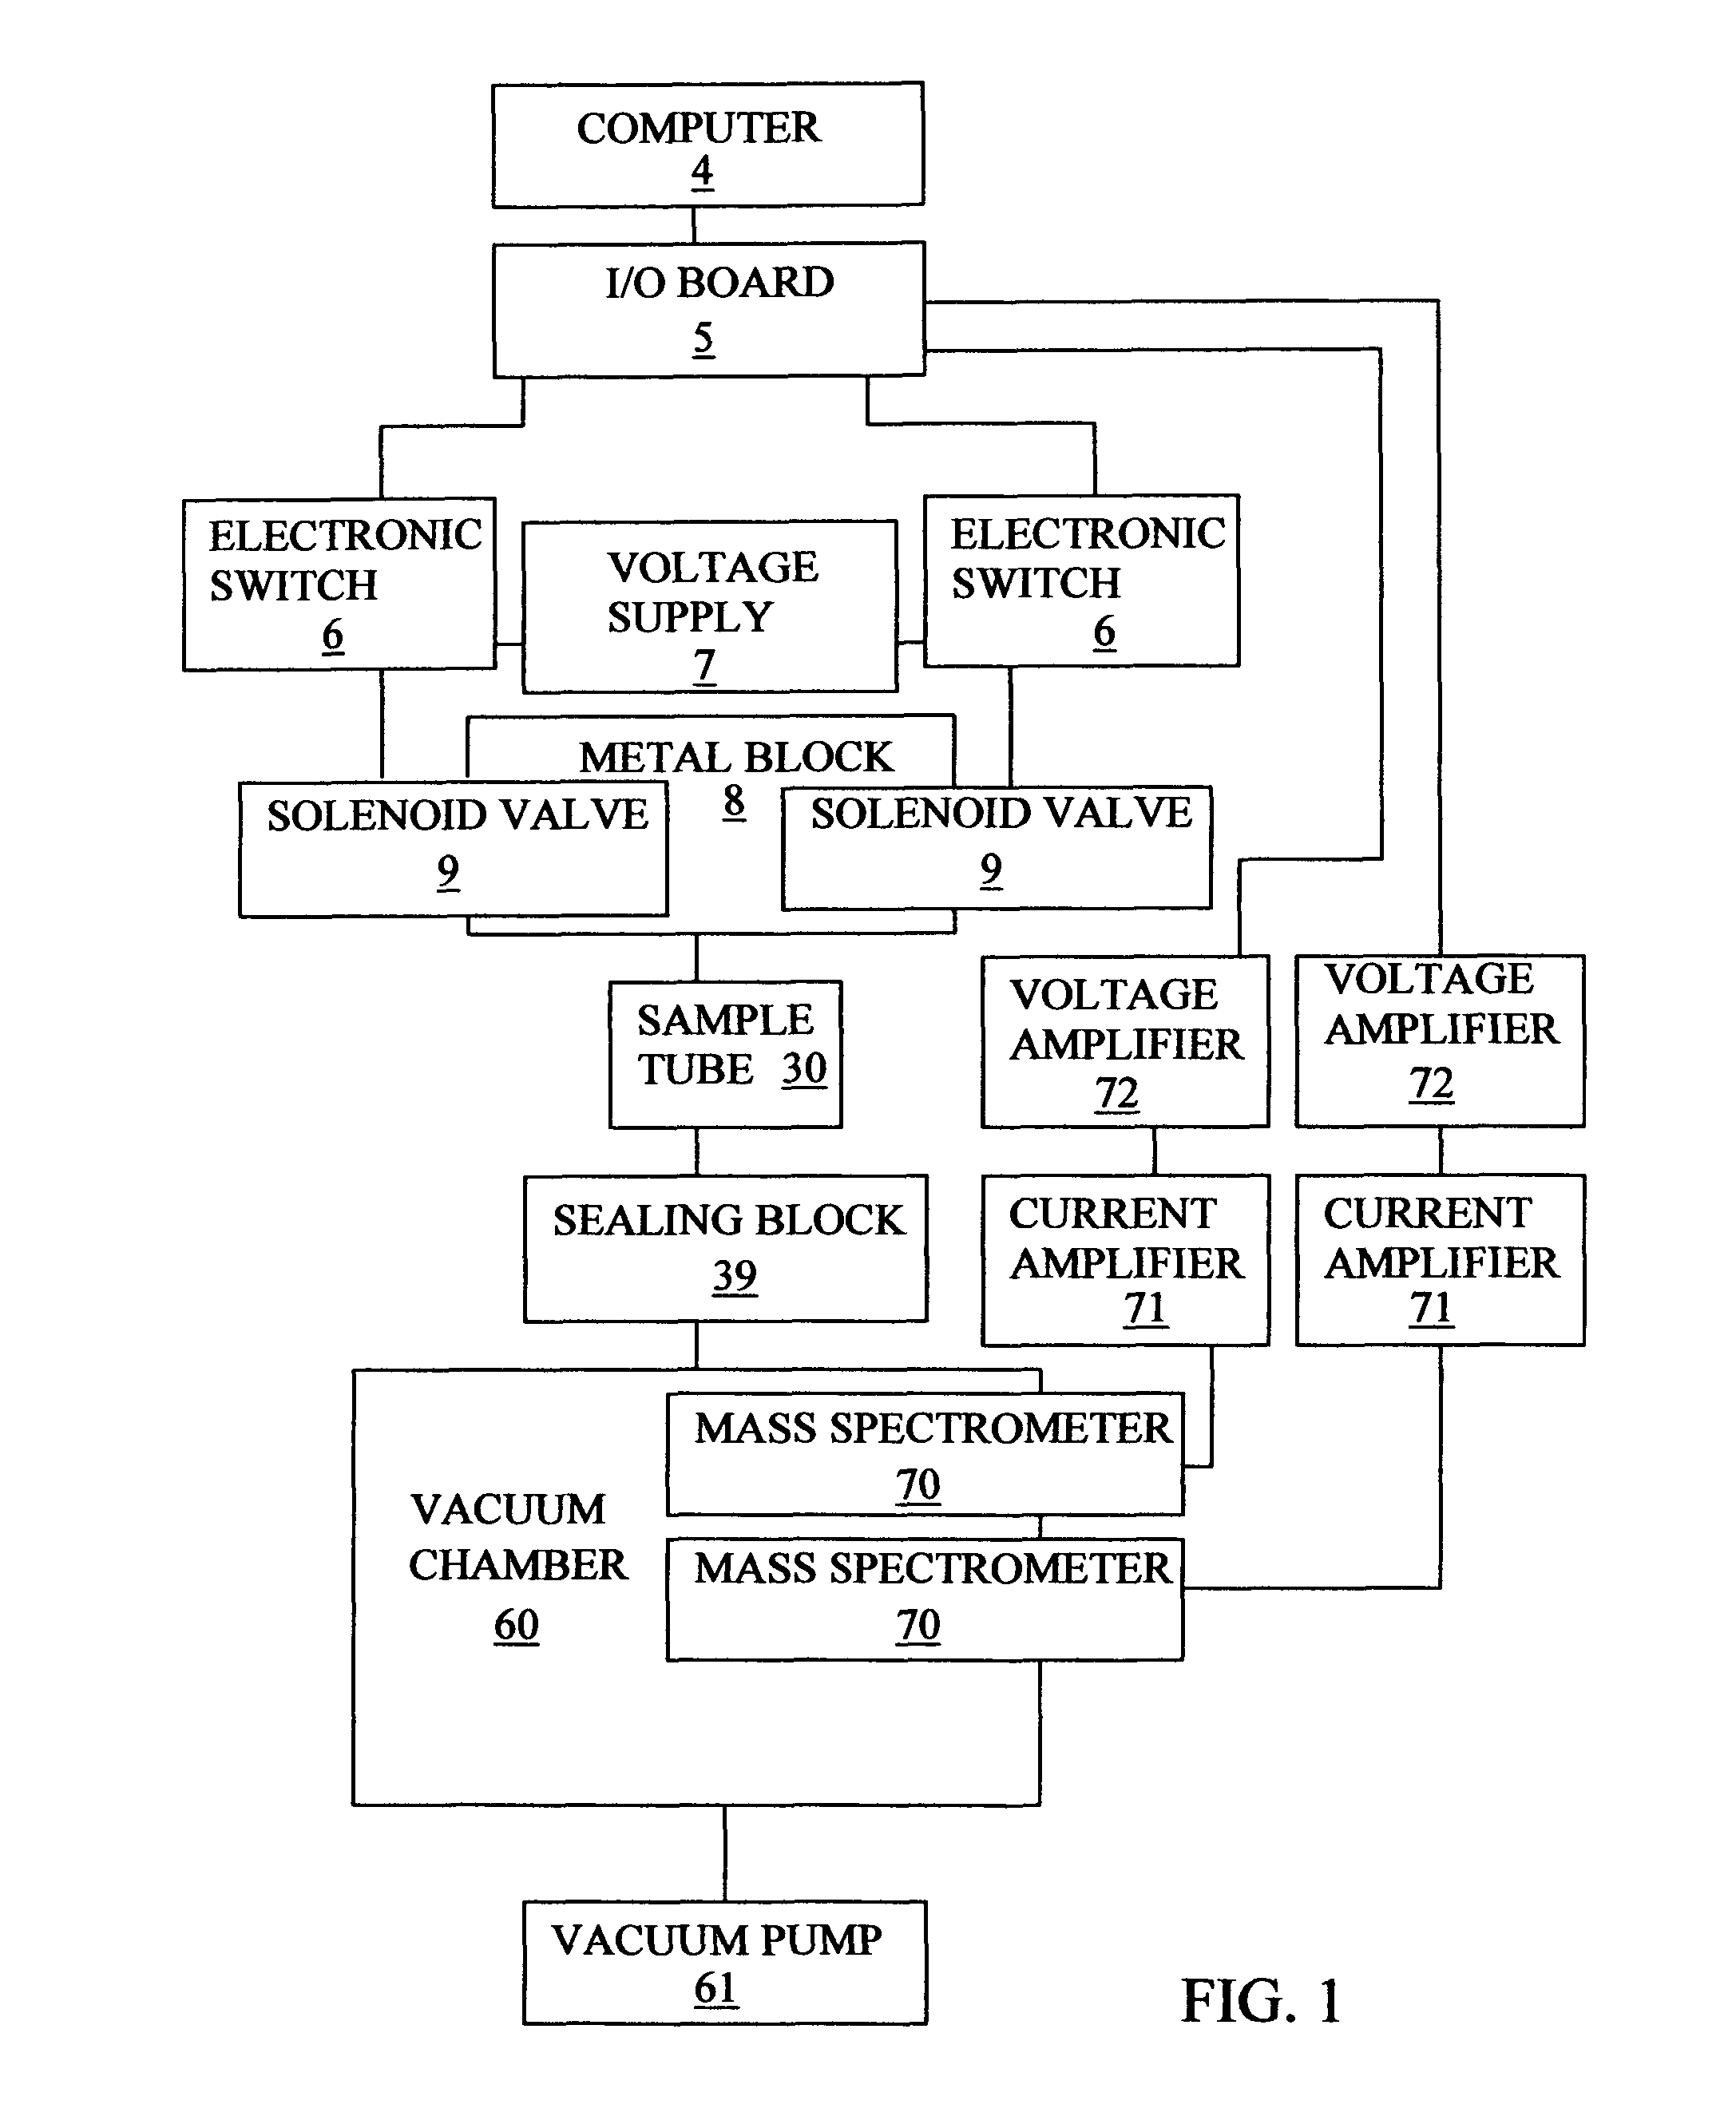 Apparatus and method to measure the kinetics parameters of a porous powder catalyst